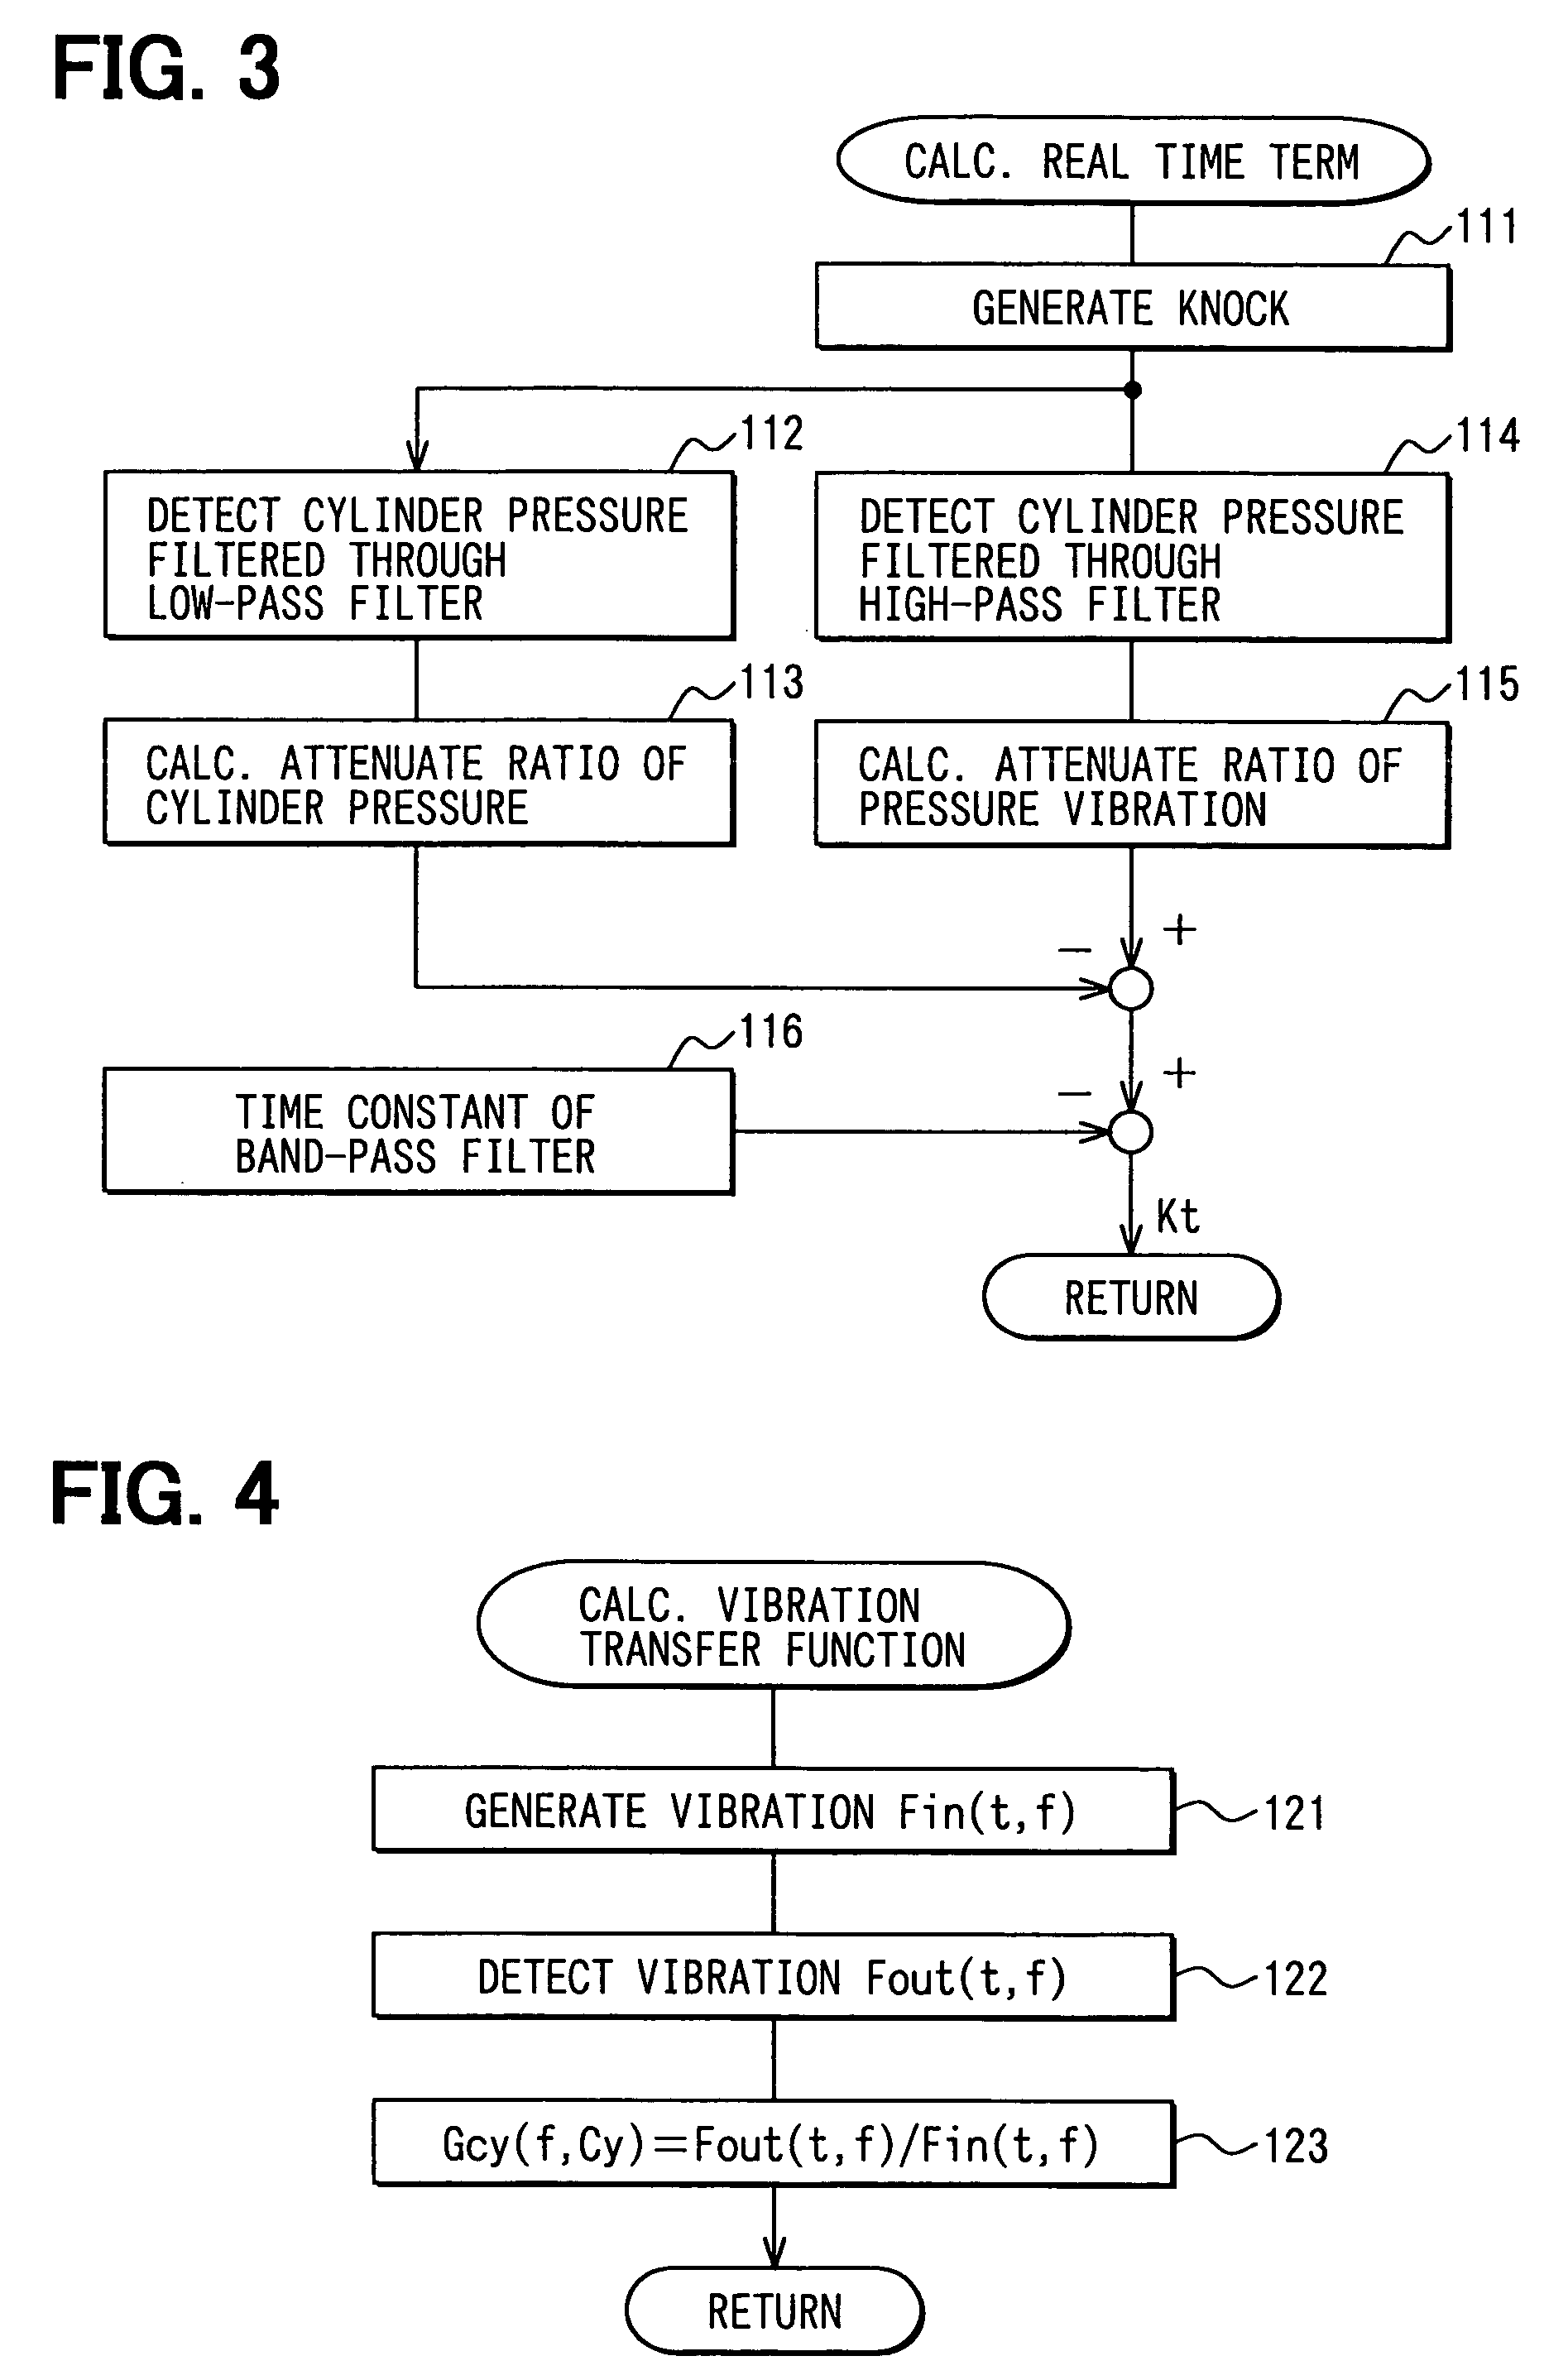 Knock detecting apparatus for internal combustion engine